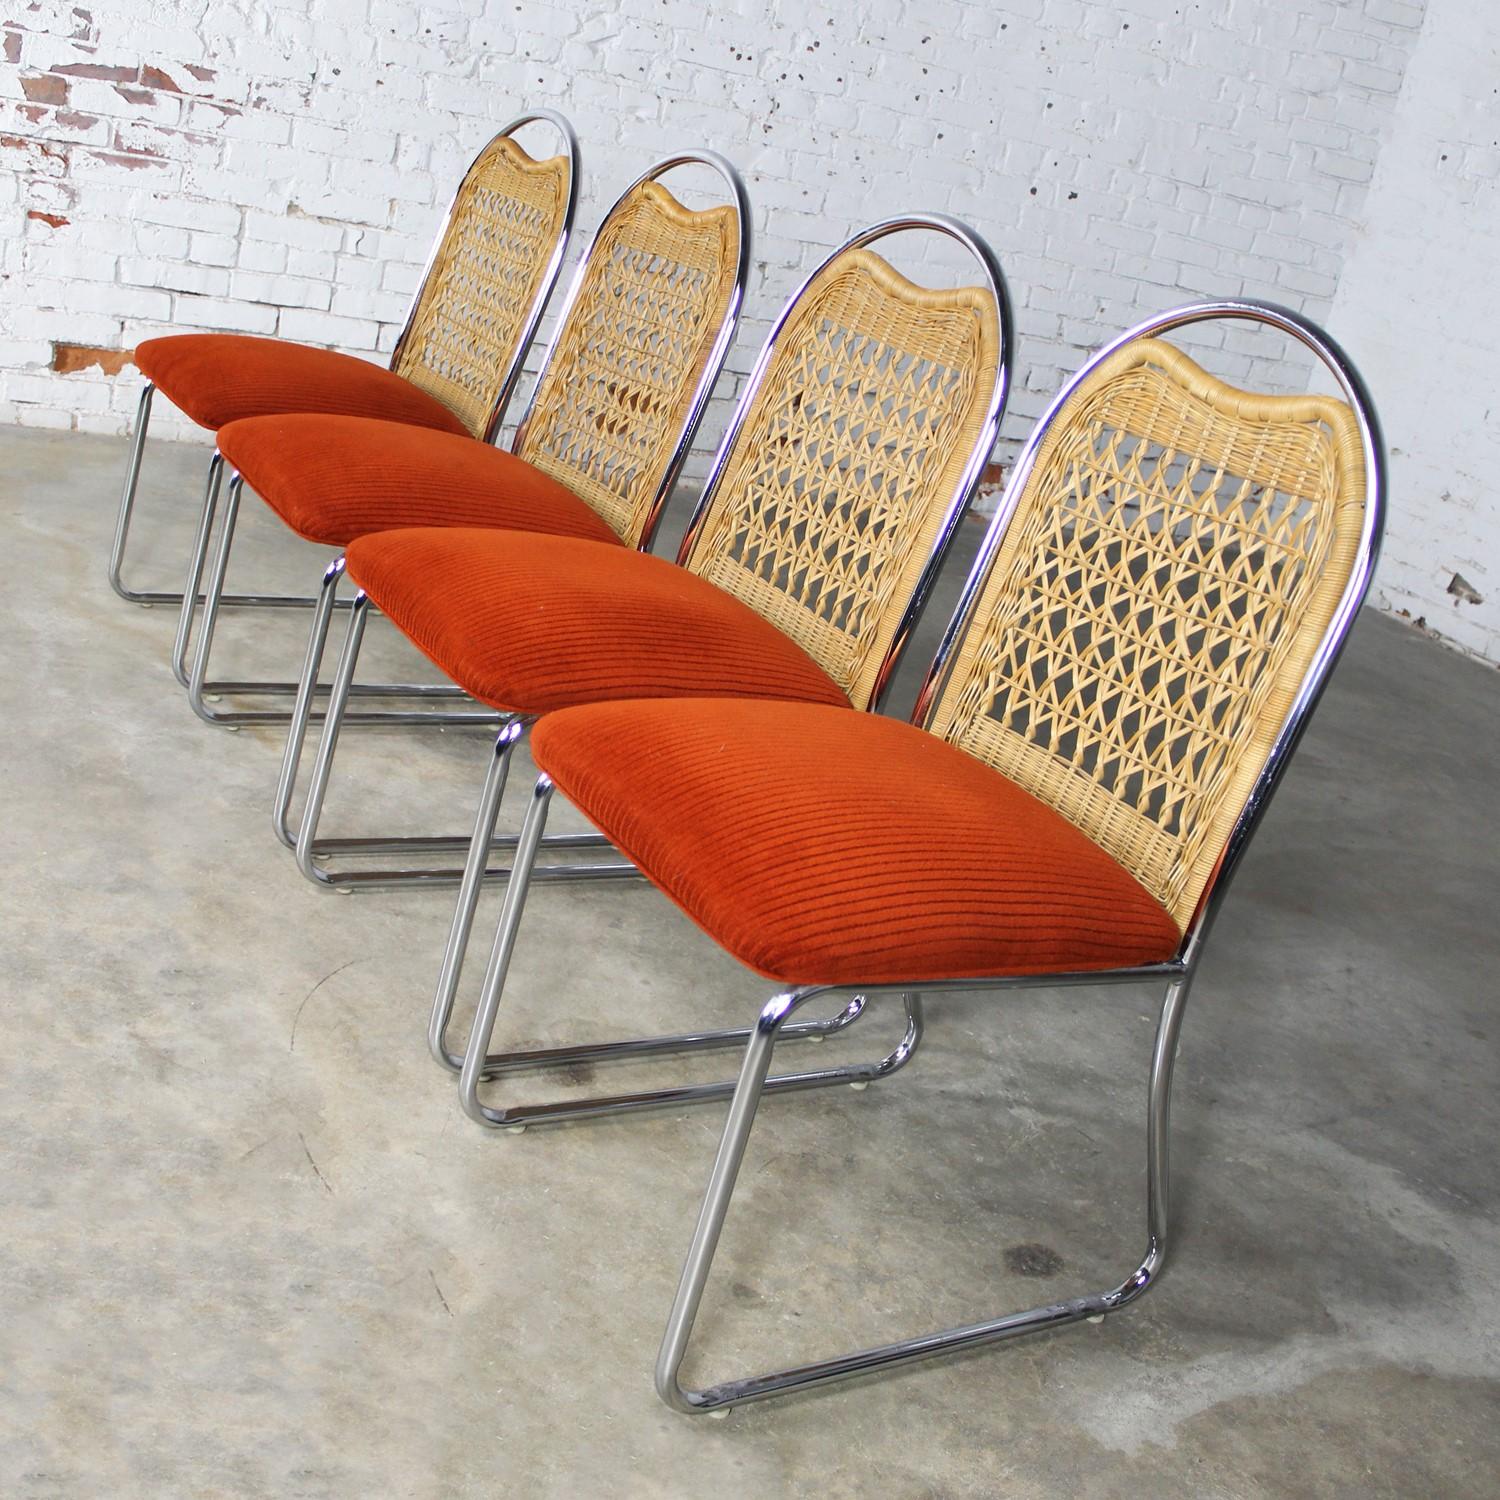 Lovely vintage Modern Daystrom dining chairs comprised of chrome frames, natural wicker seat backs, and orange fabric upholstered seats. Beautiful condition, keeping in mind that these are vintage and not new so will have signs of use and wear.